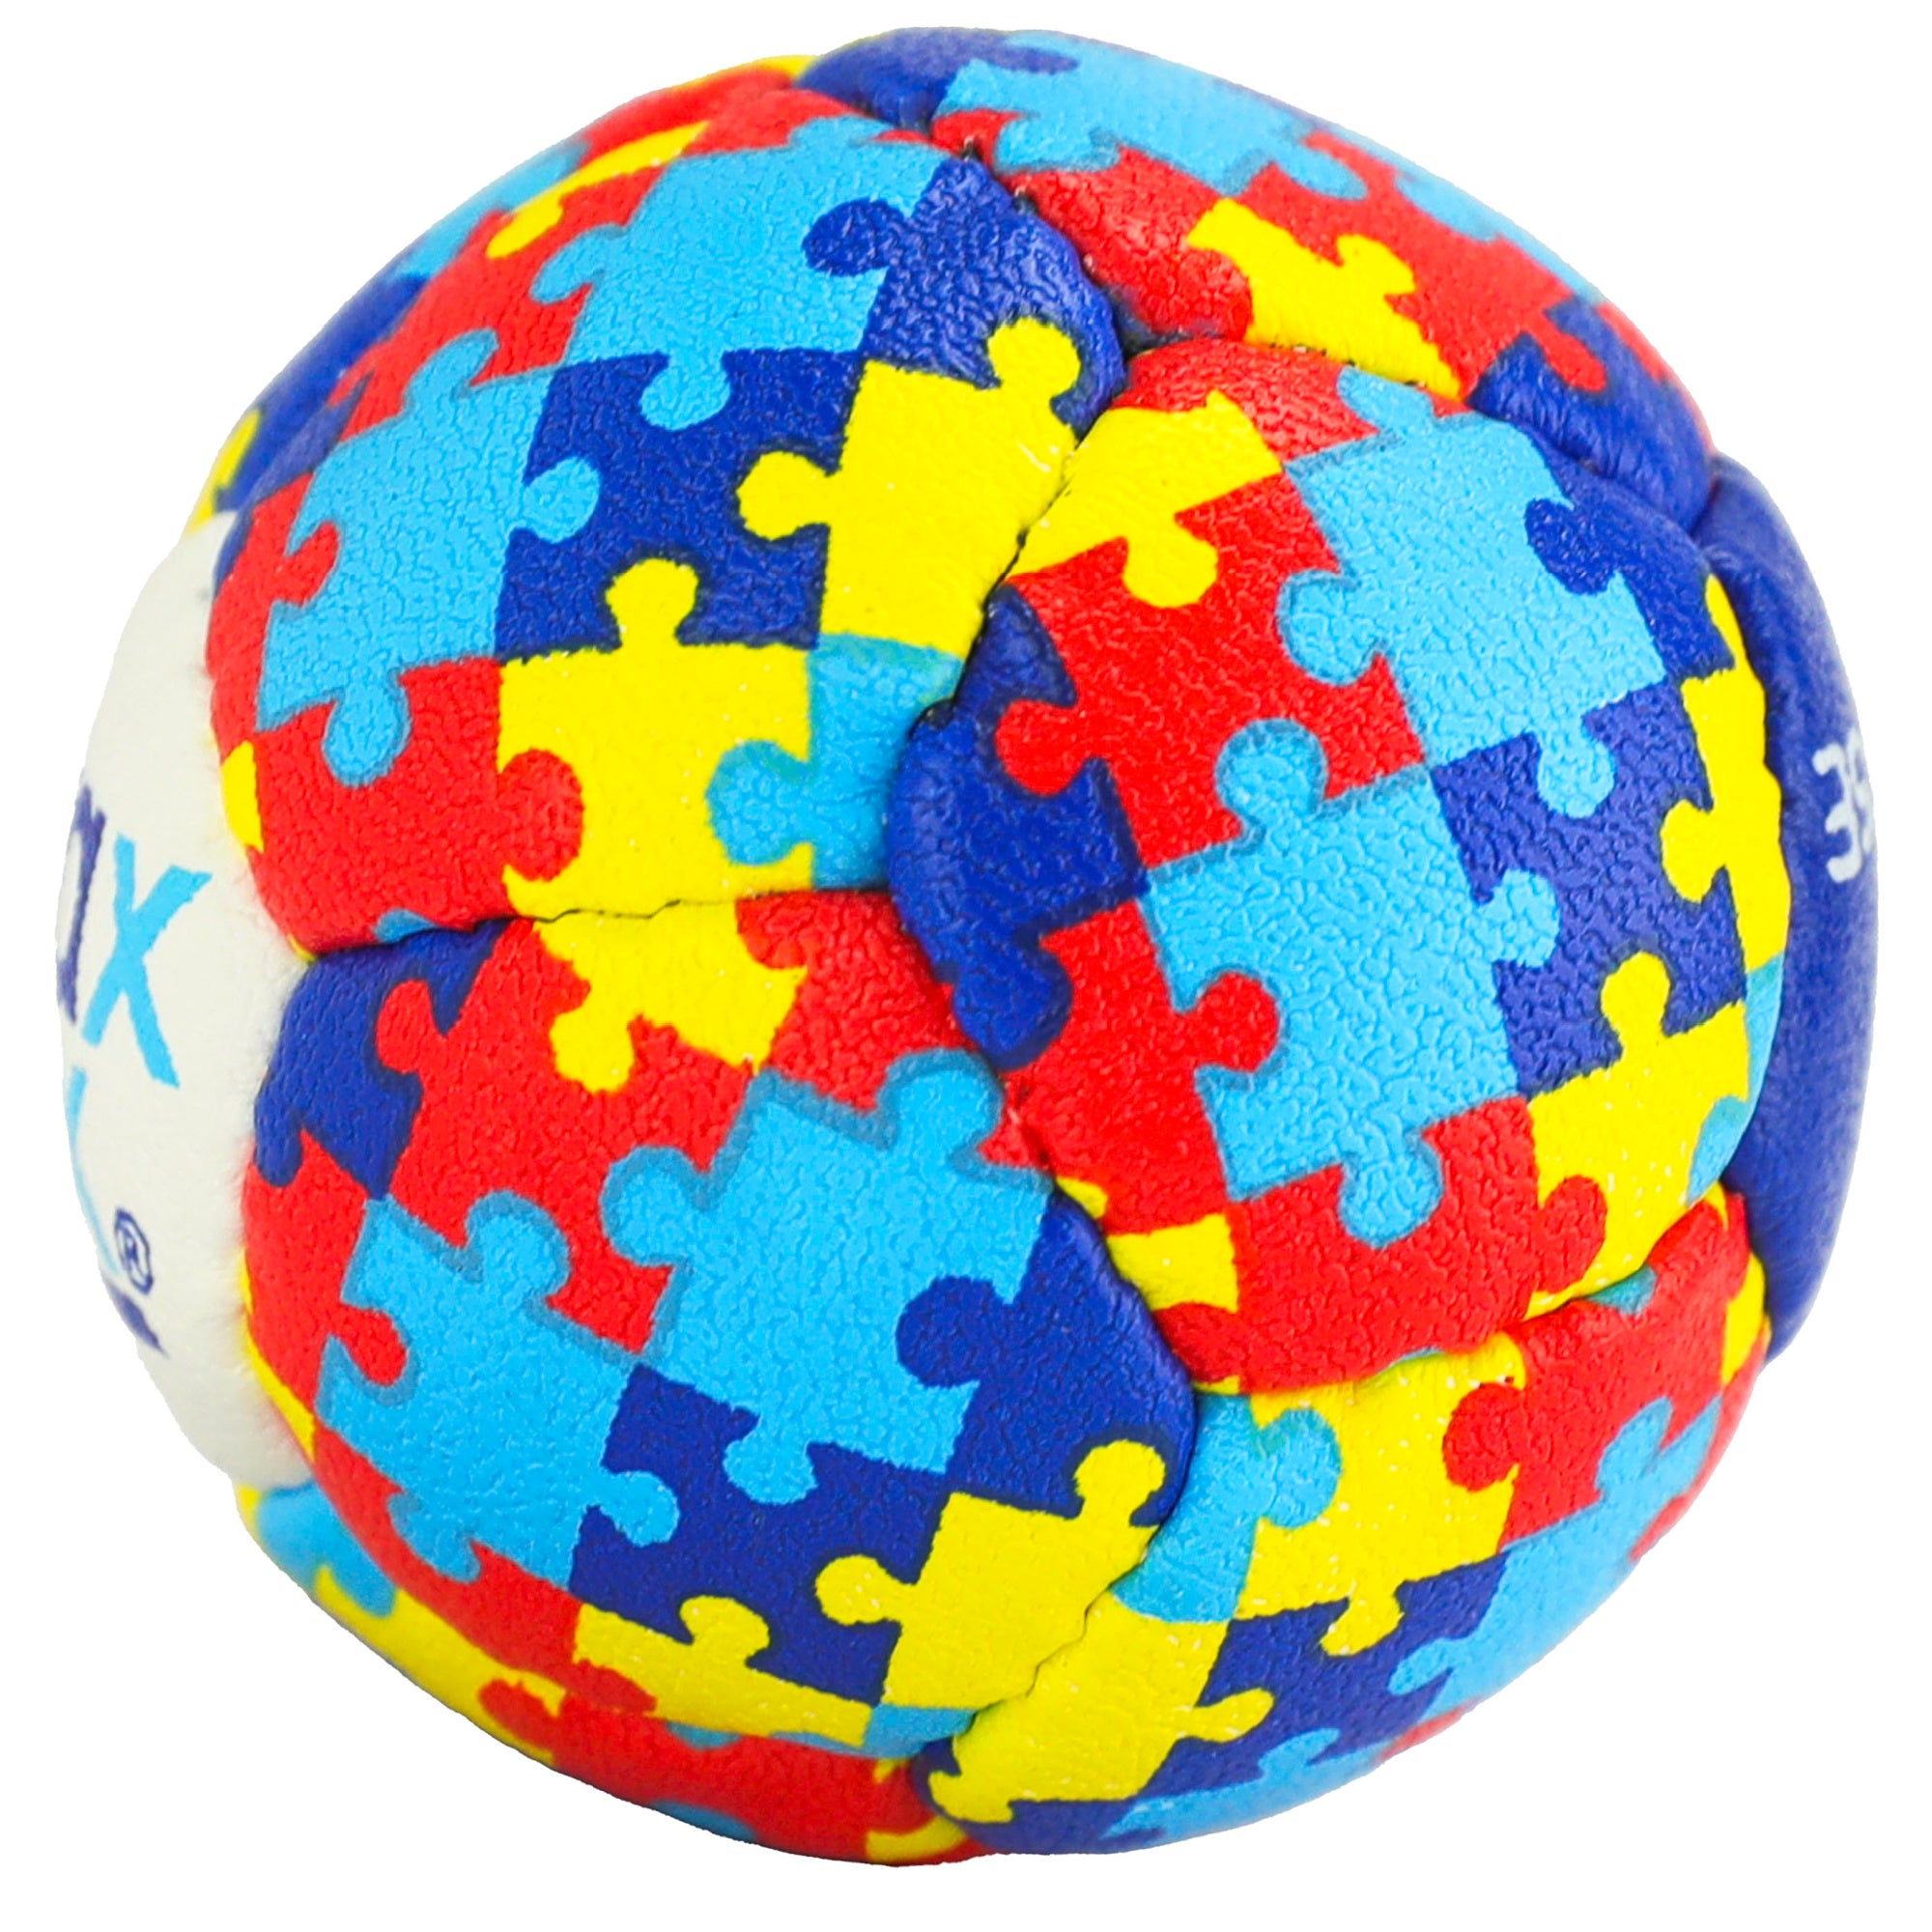 Swax Lax Lacrosse Practice Ball - Autism - Play For a Purpose - Side